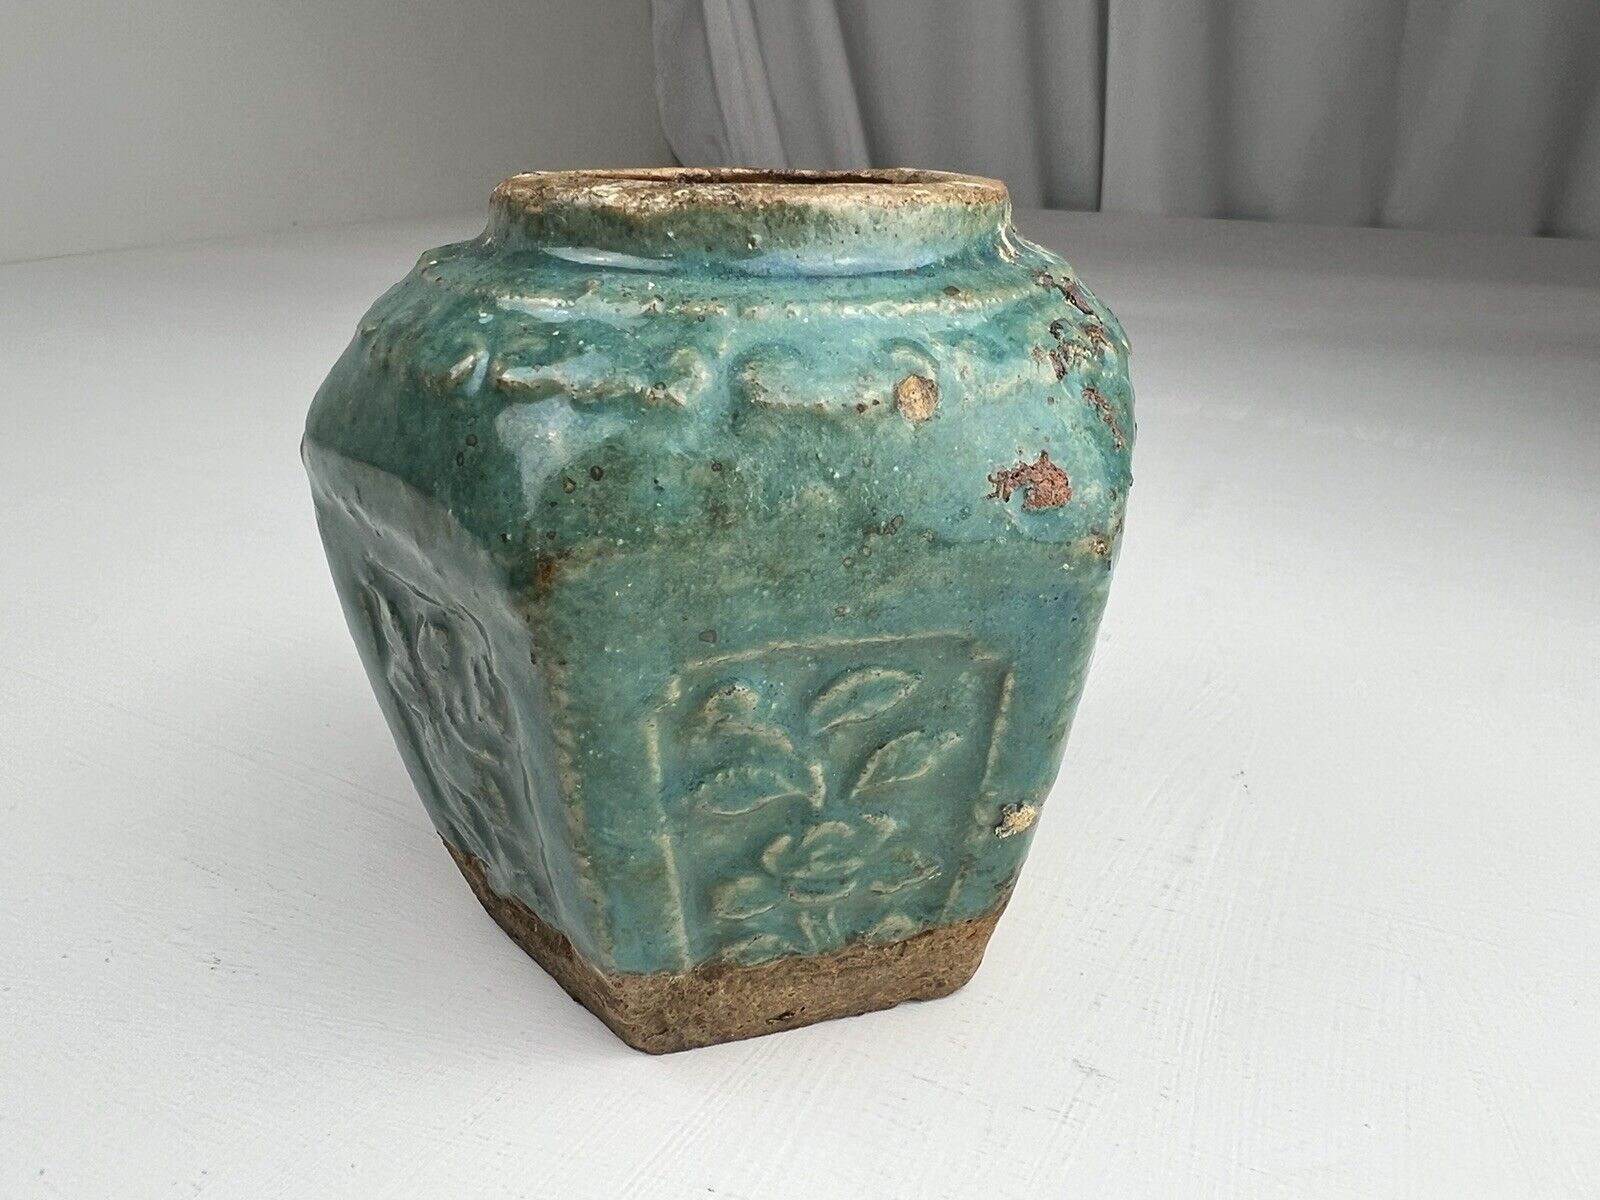 Very Old Rustic Chinese Hexagon Ginger Jar Vase Celadon Glaze Pottery Floral